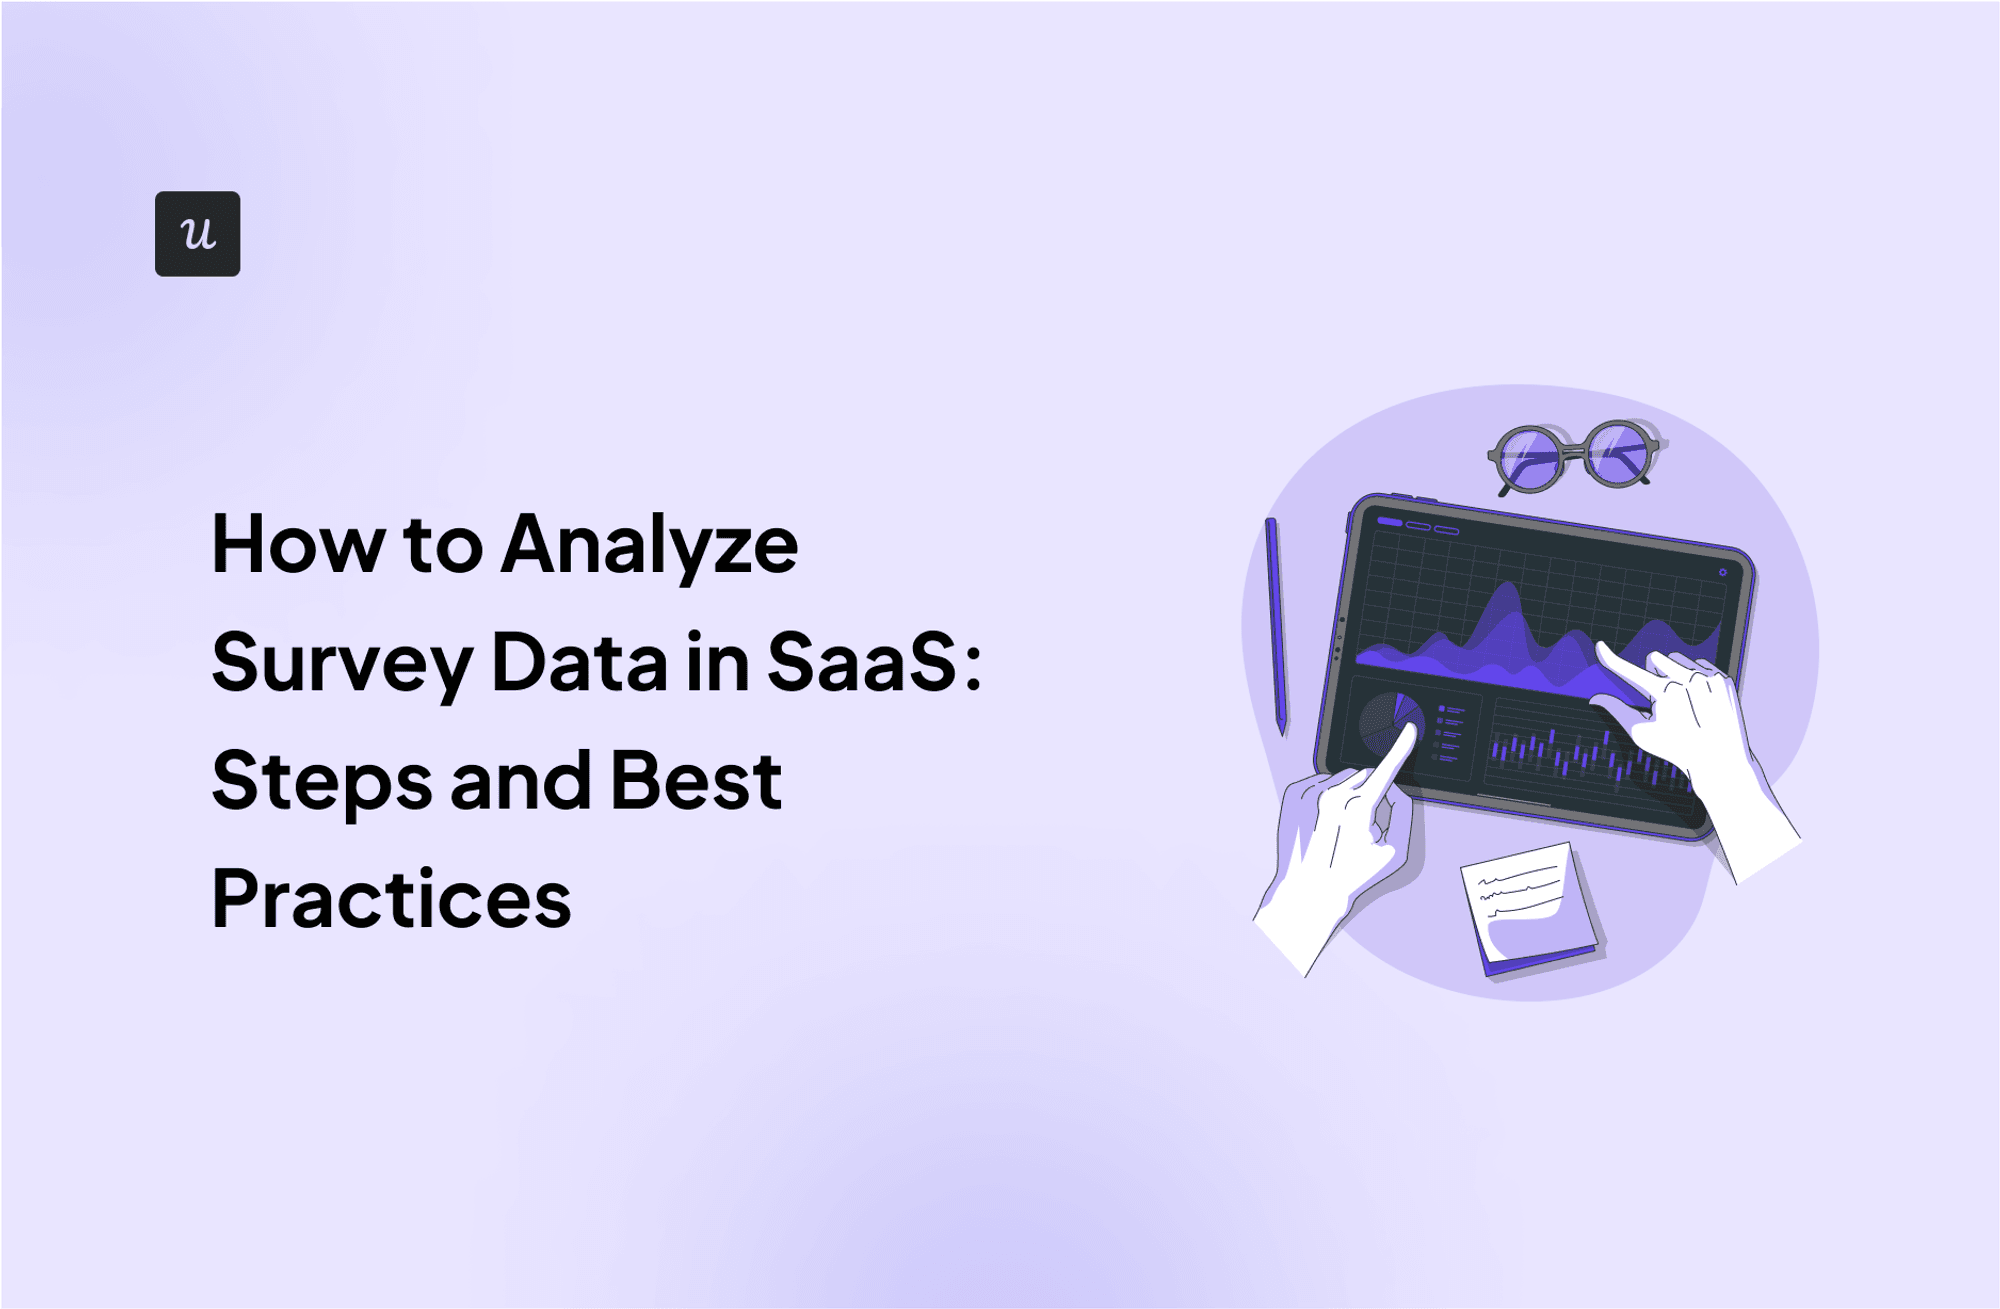 How to Analyze Survey Data in SaaS: Steps and Best Practices cover